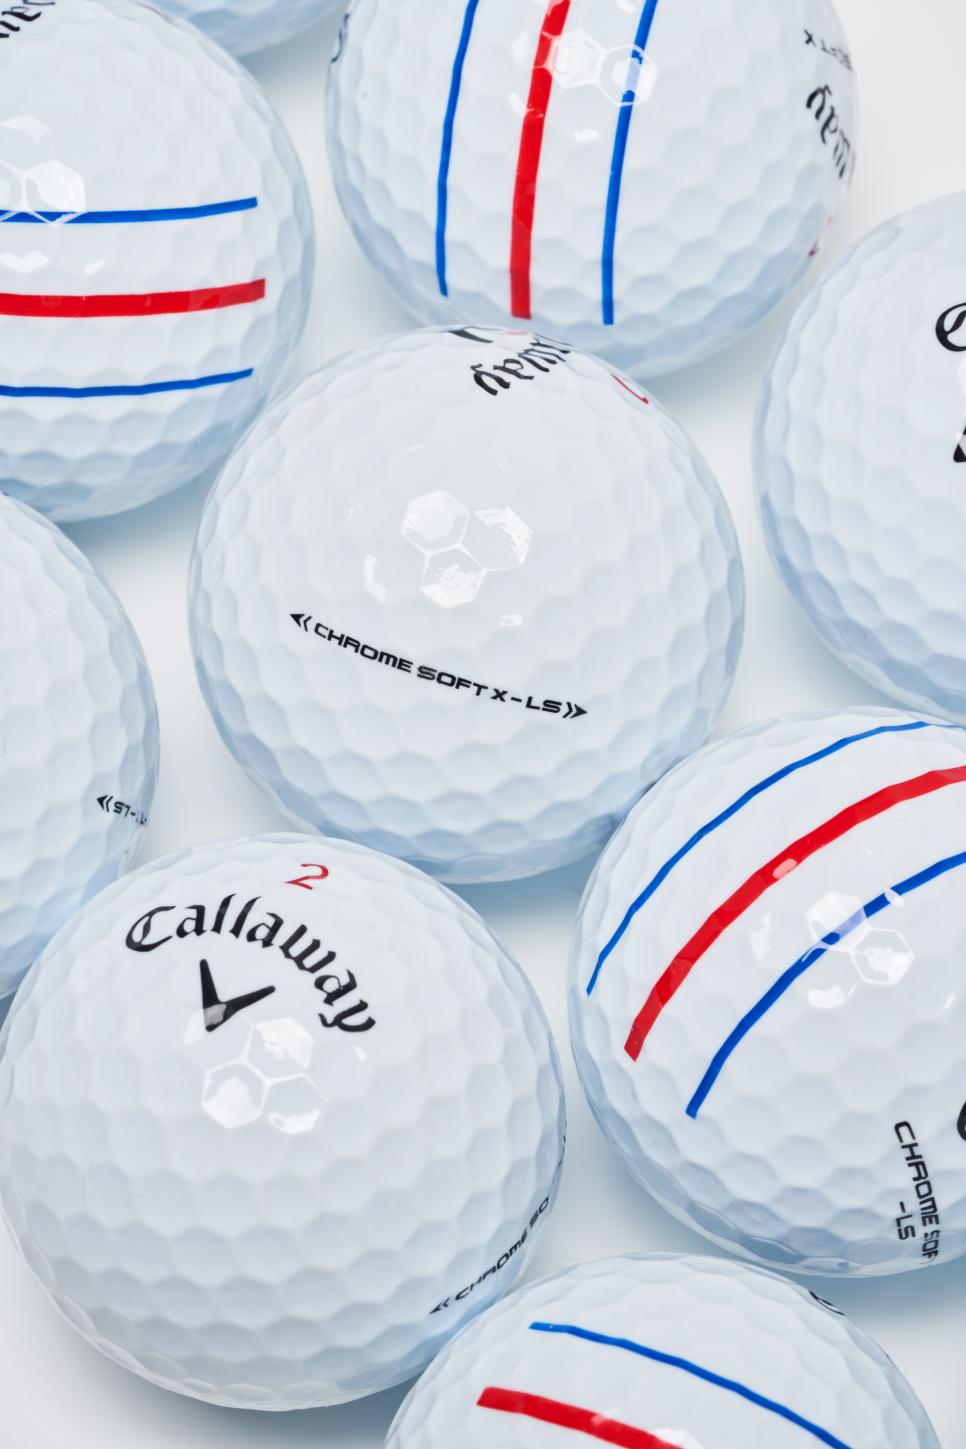 Callaway adds low-spin Chrome Soft X LS to lineup, but it's not just about  driver distance | Golf Equipment: Clubs, Balls, Bags | GolfDigest.com